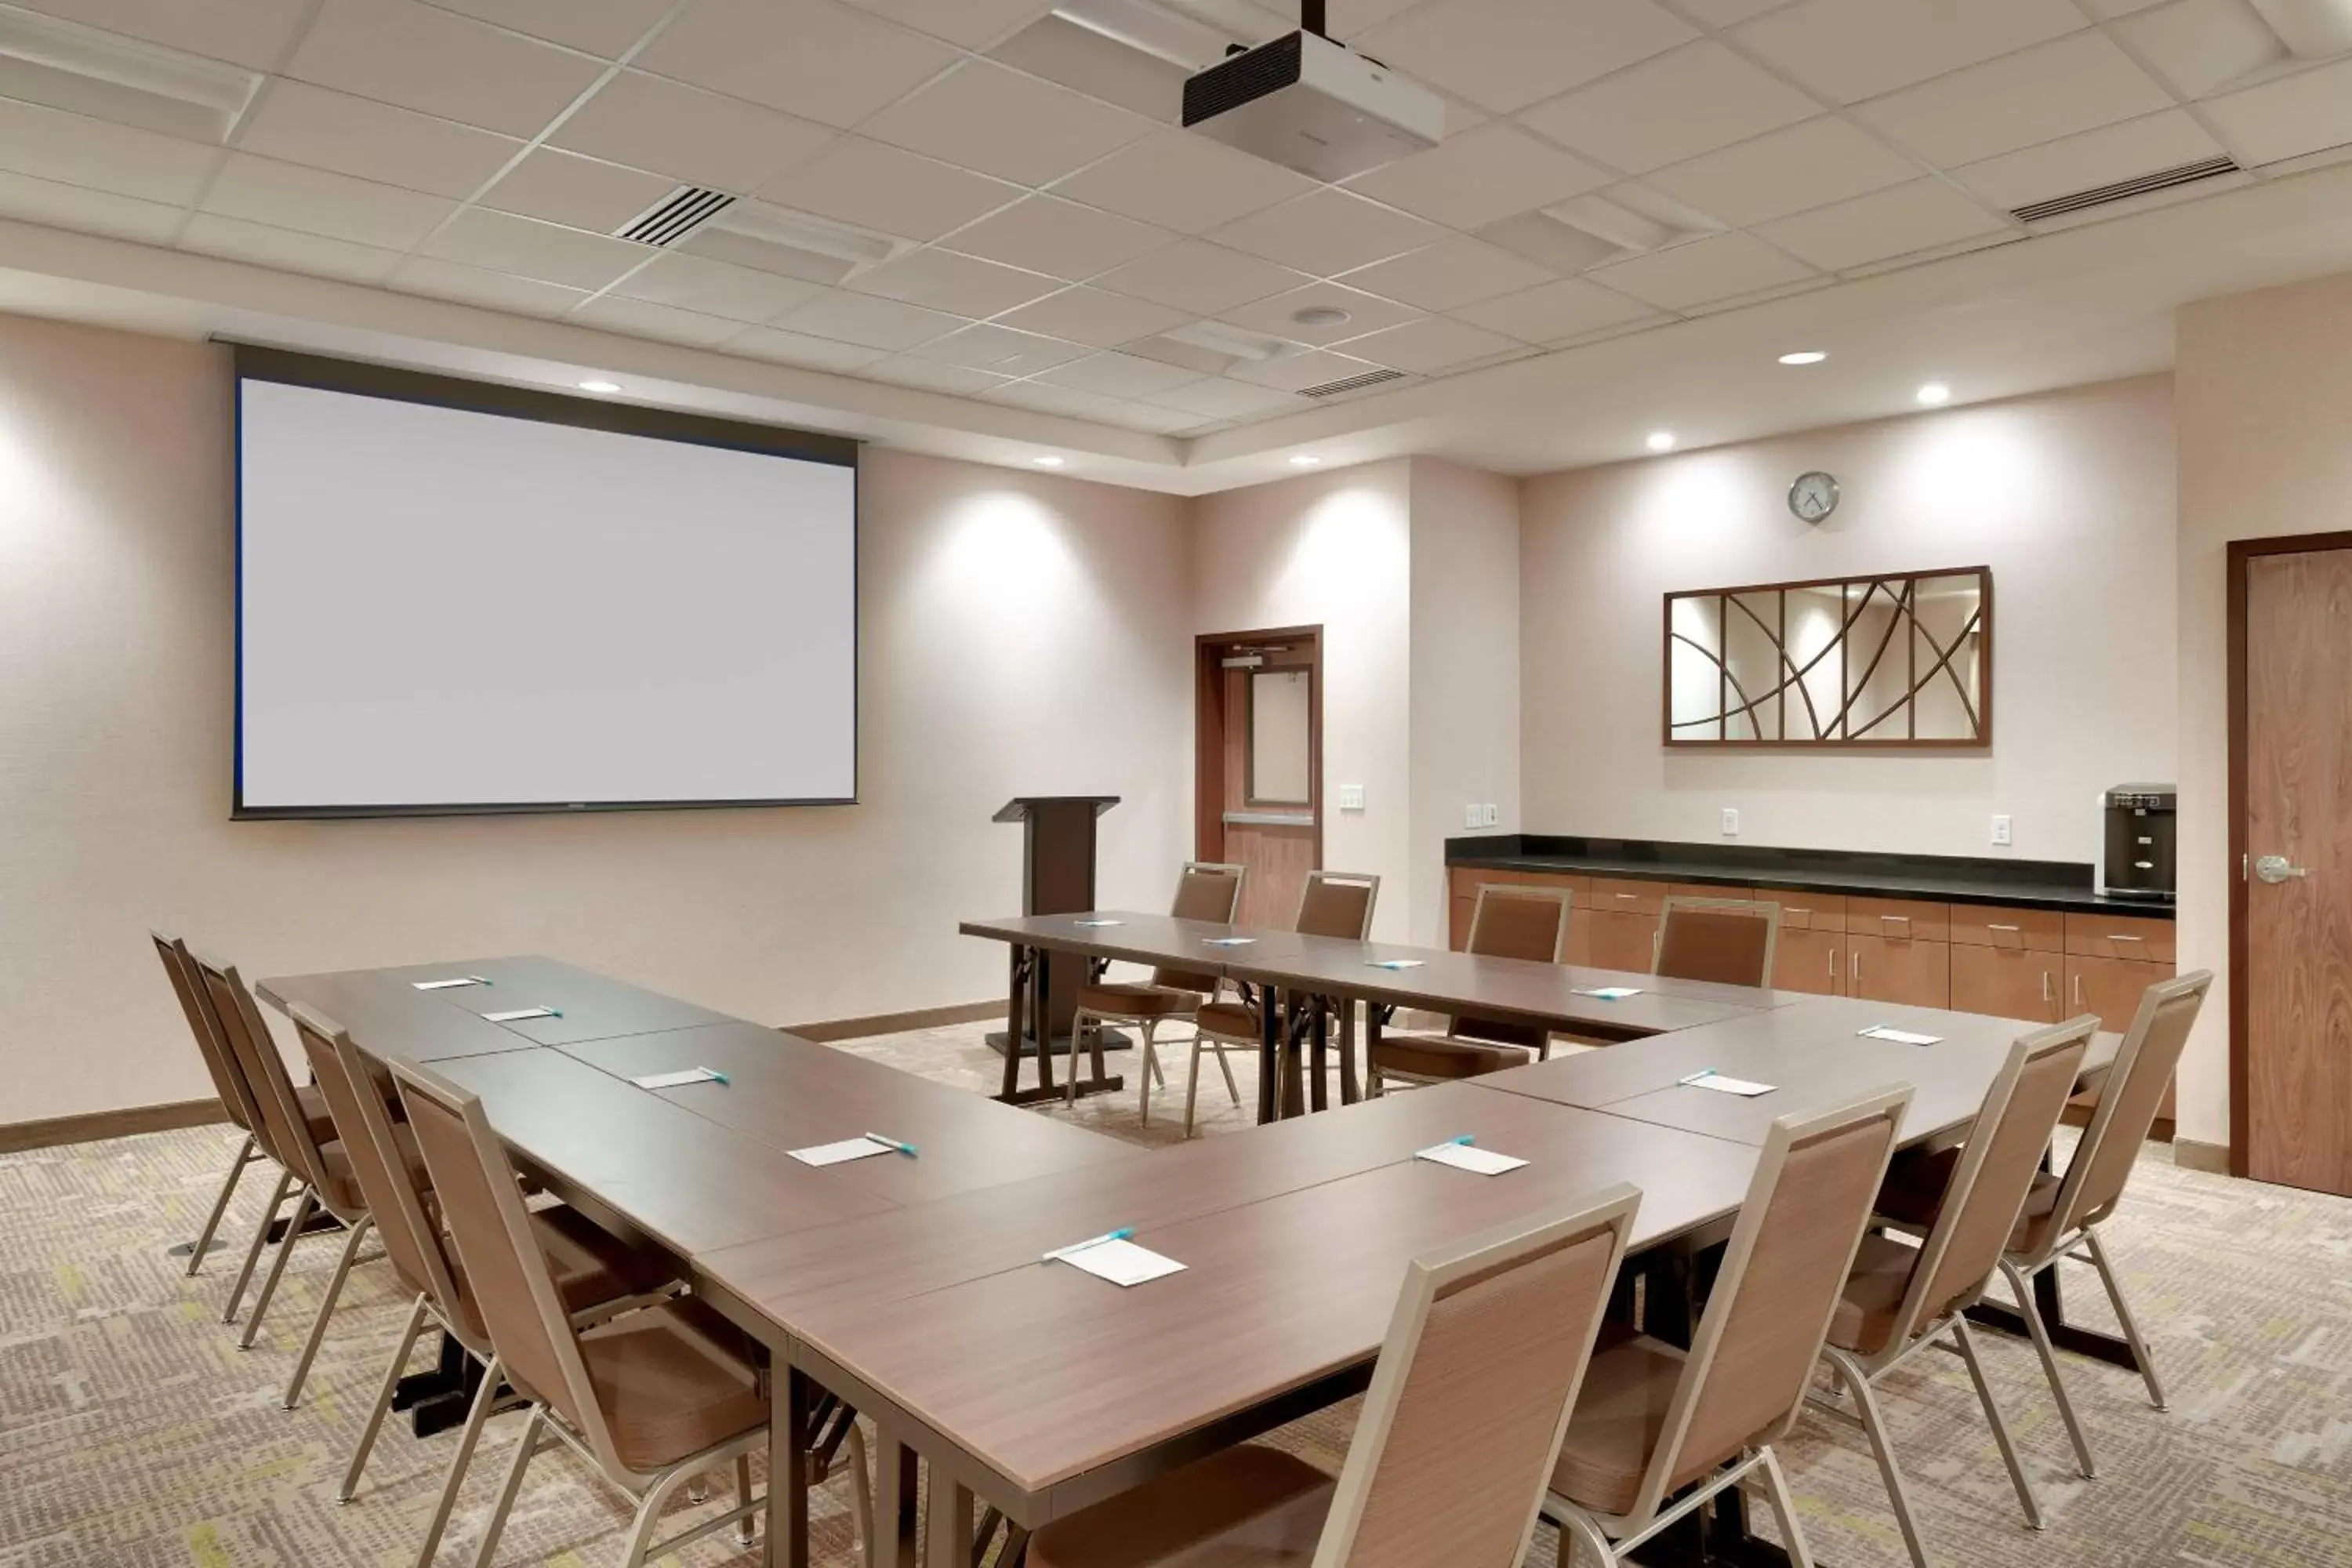 Meeting/conference room in Fairfield Inn & Suites by Marriott Denver West/Federal Center